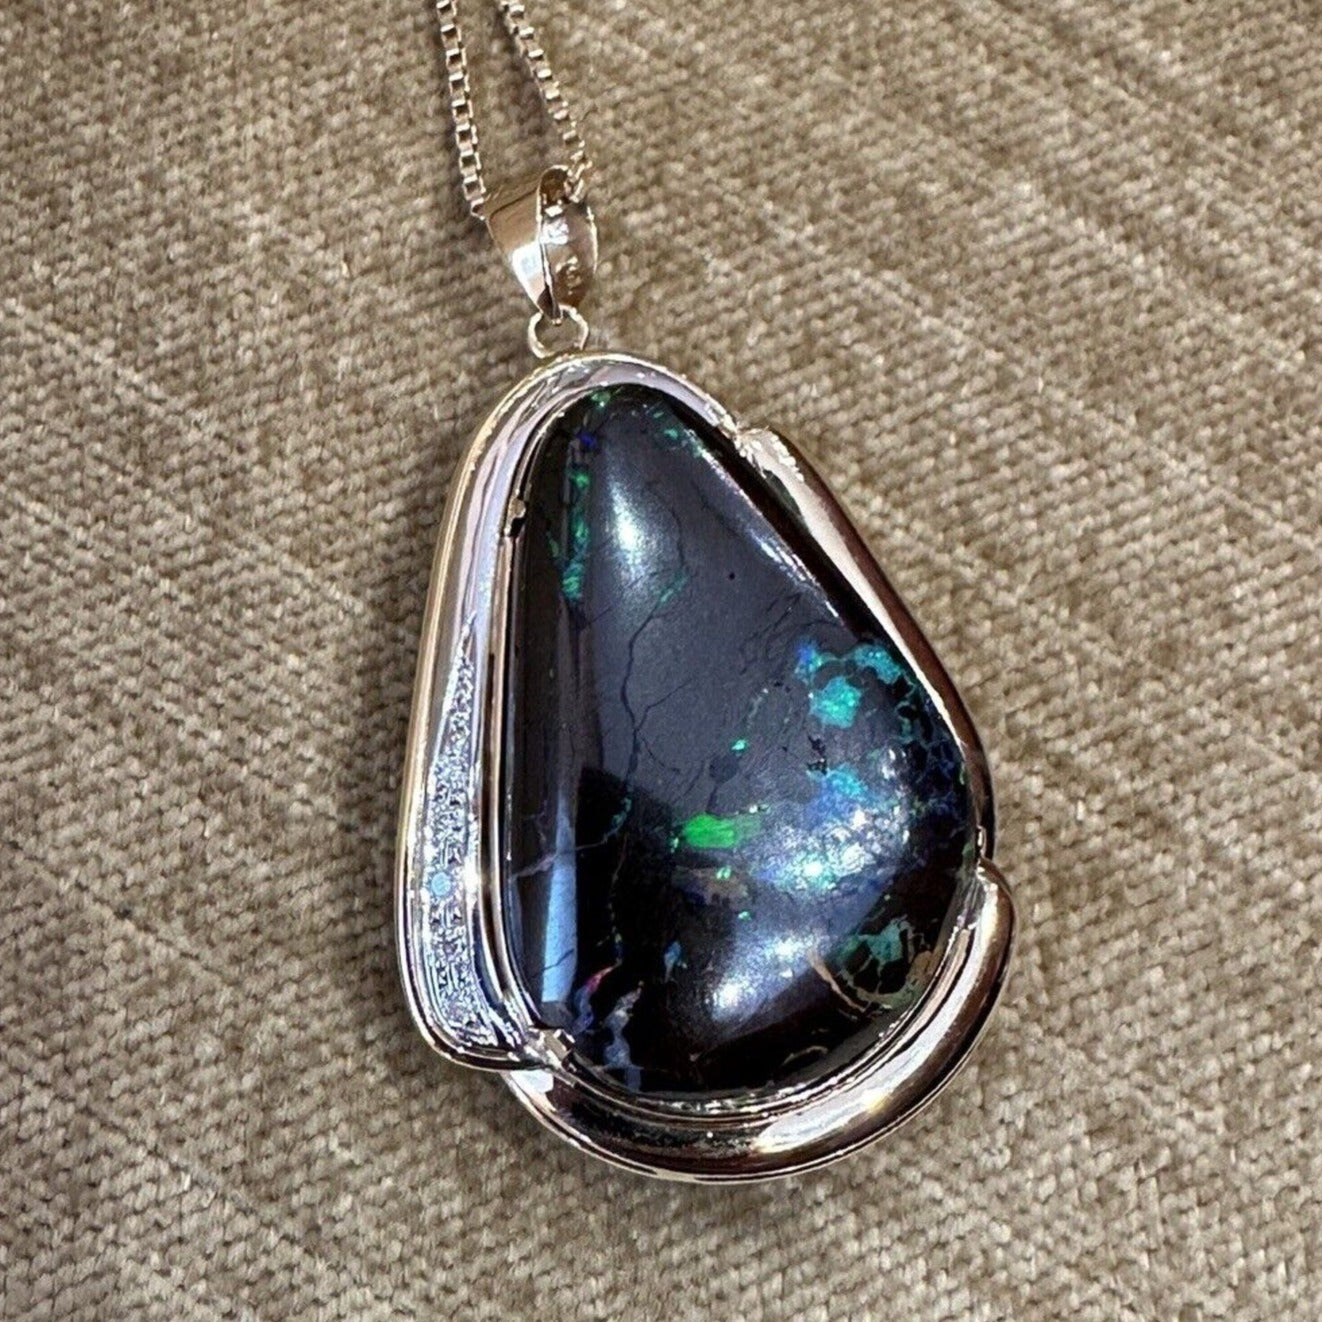 Large Boulder Opal Pendant Necklace with Diamonds in 18k/14k Yellow Gold